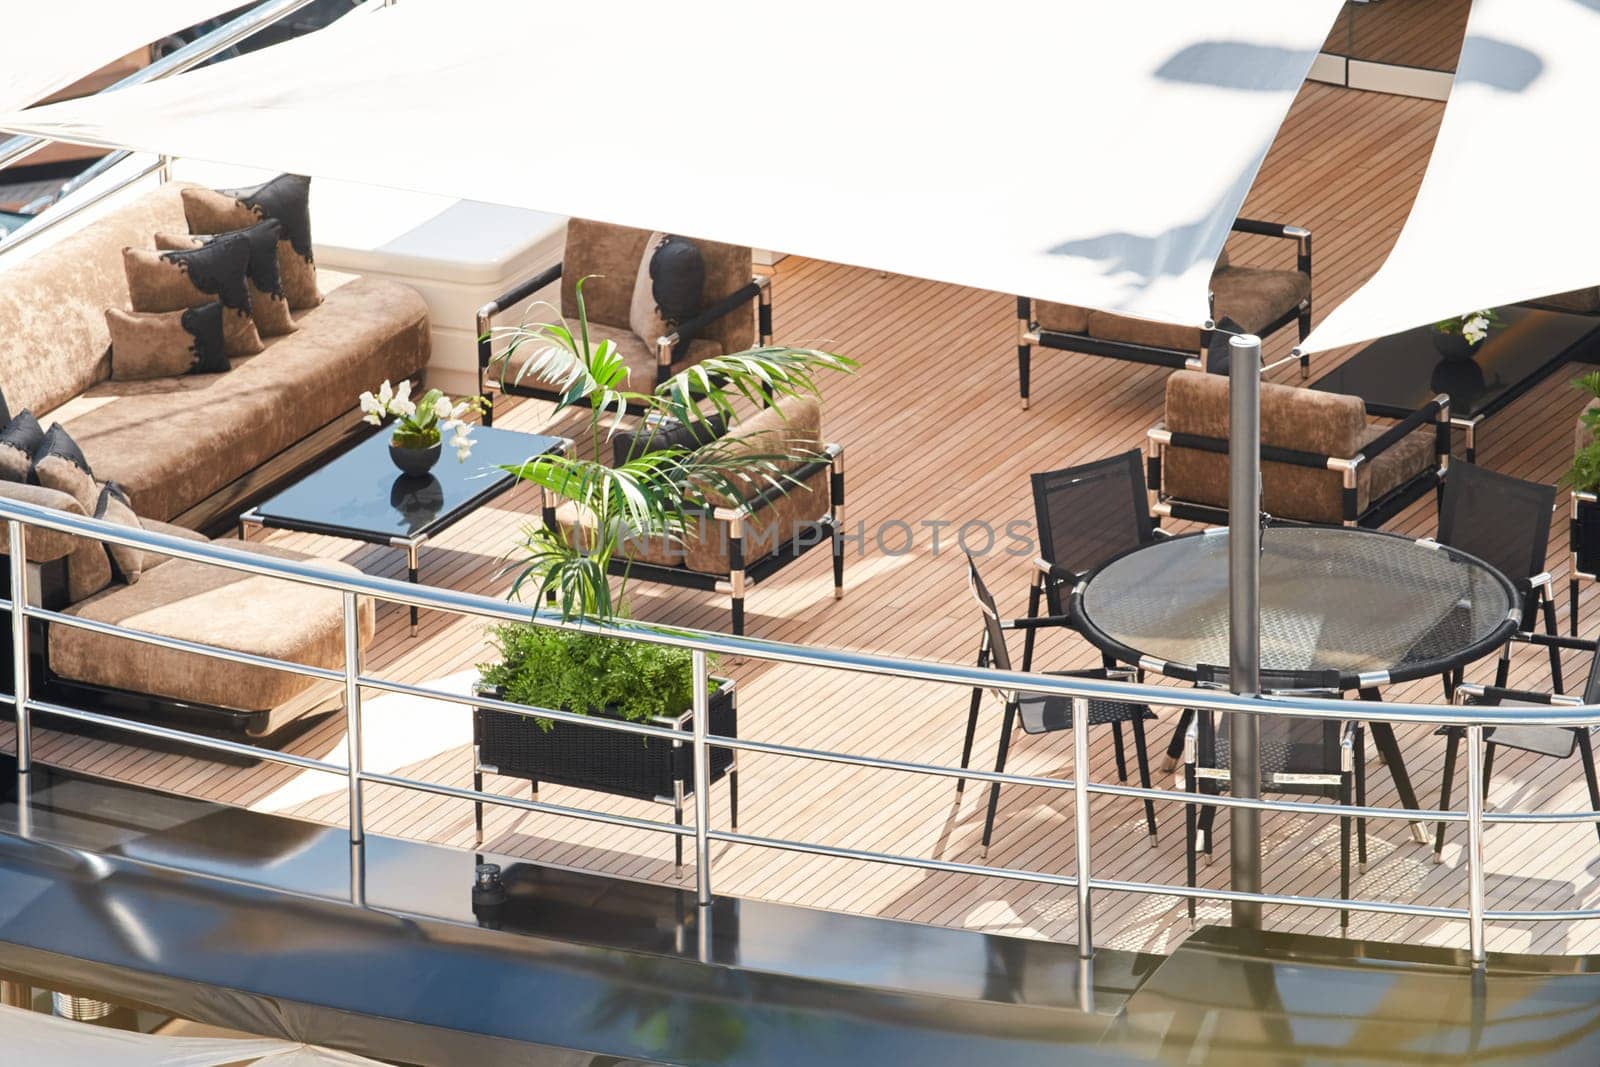 Close up footage of a relaxation area on the open teak deck of an expensive megayacht at sunny day, with awnings stretched over the deck to protect from the sun, wealth life, table and chairs. High quality photo